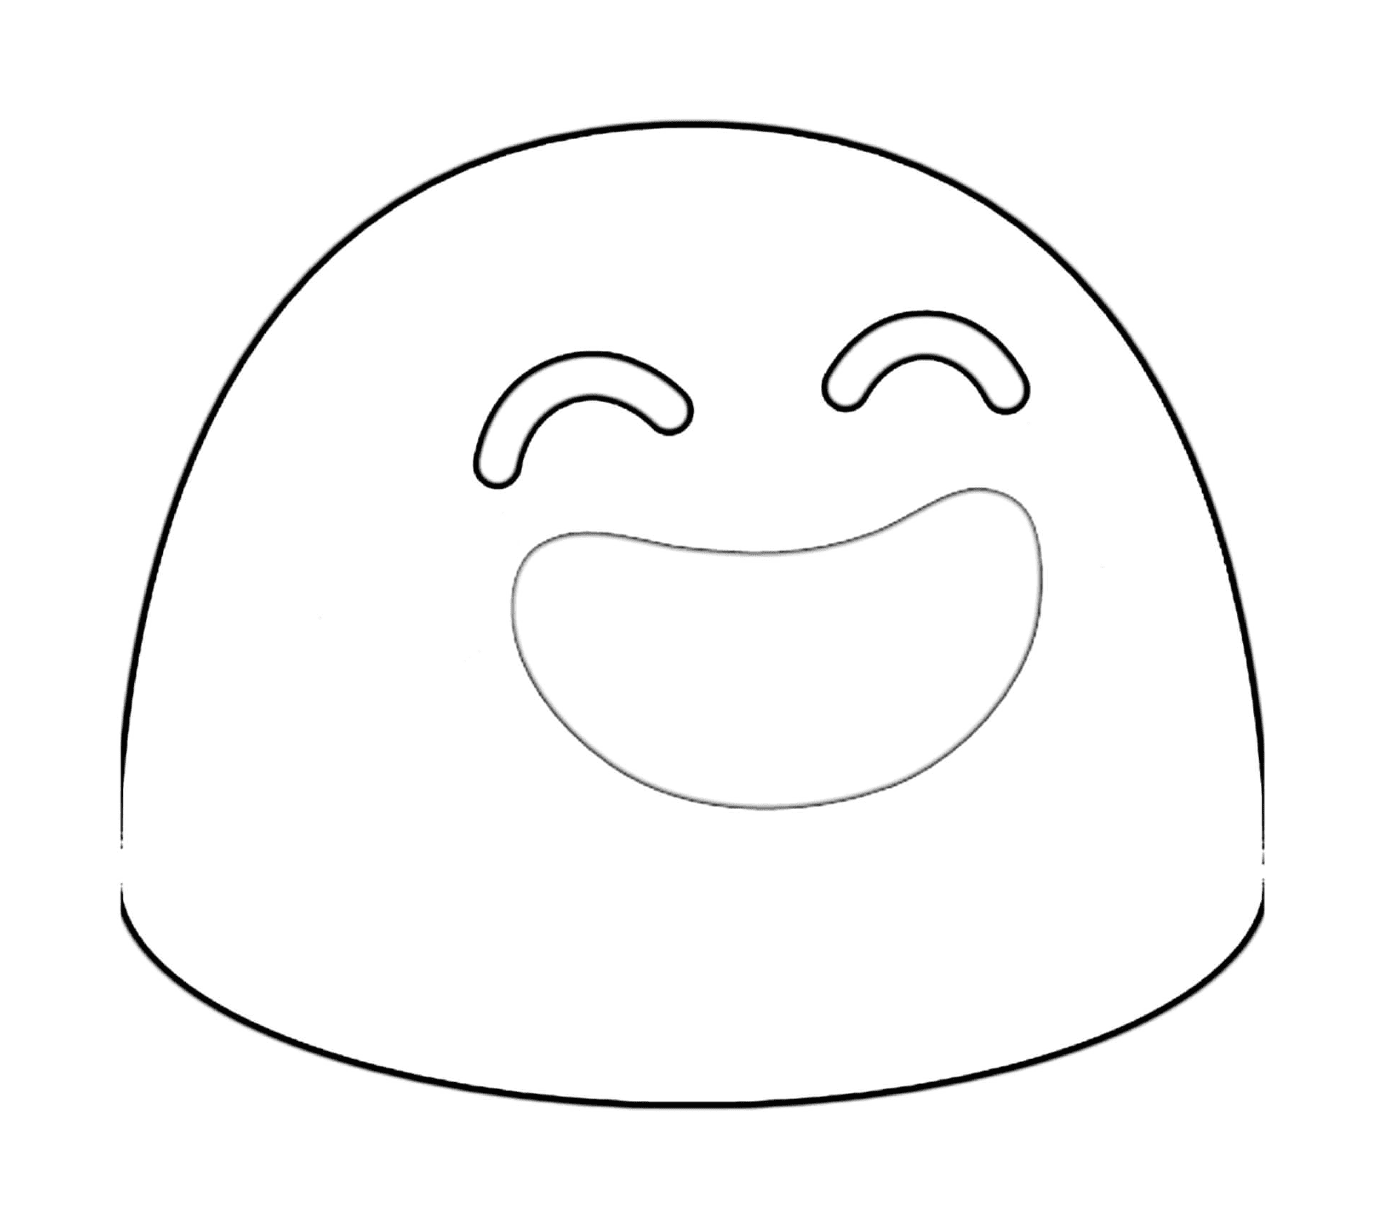  A face drawn with a big smile 